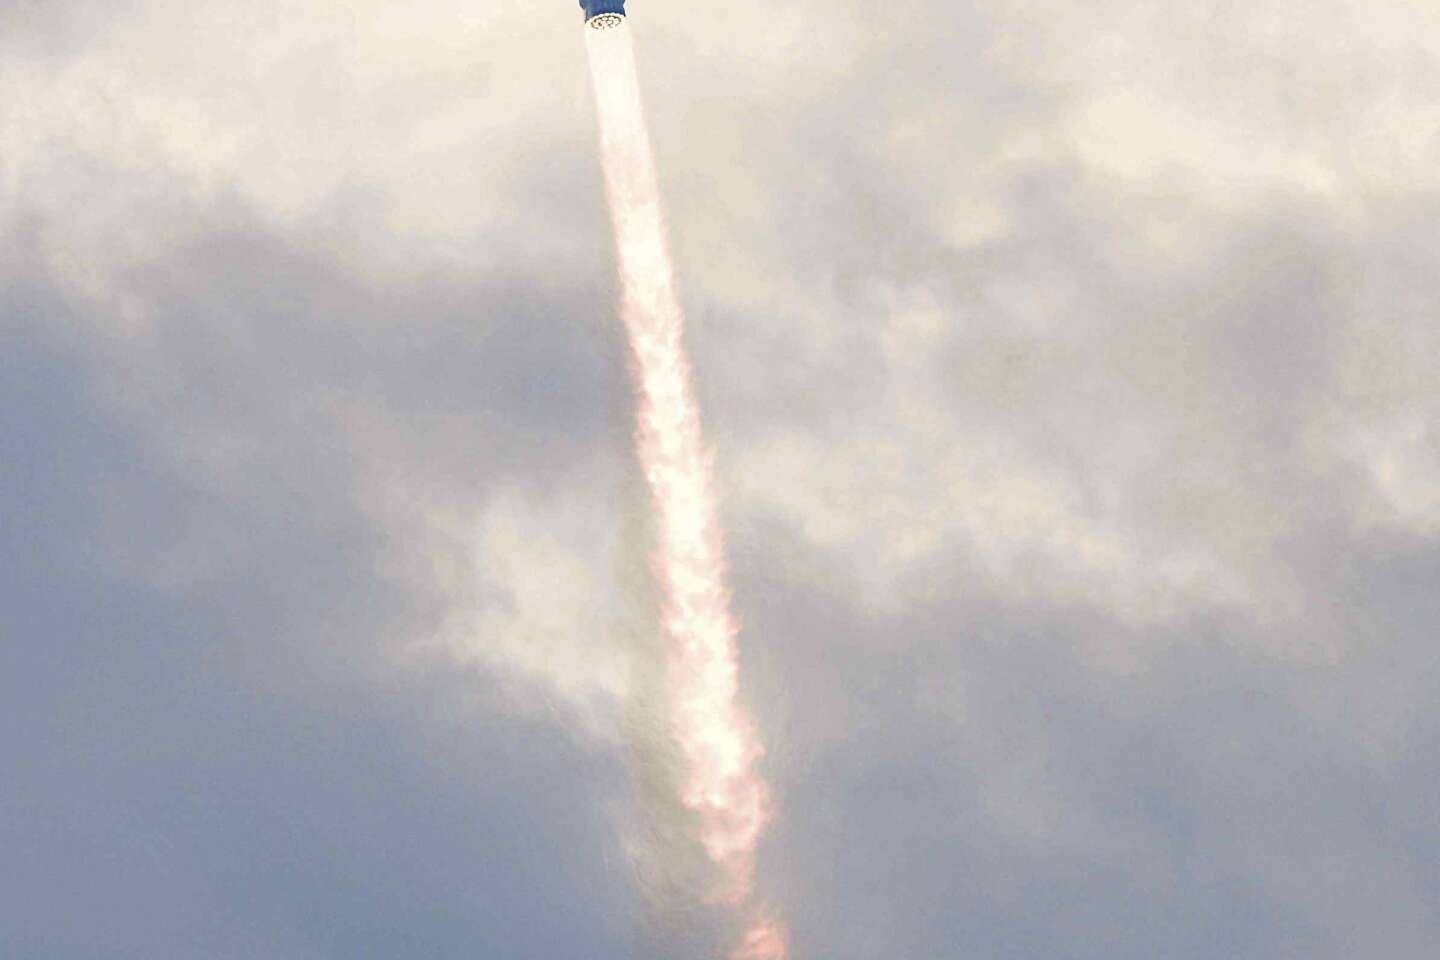 For its third flight, the spaceship disintegrates upon reentry into the atmosphere